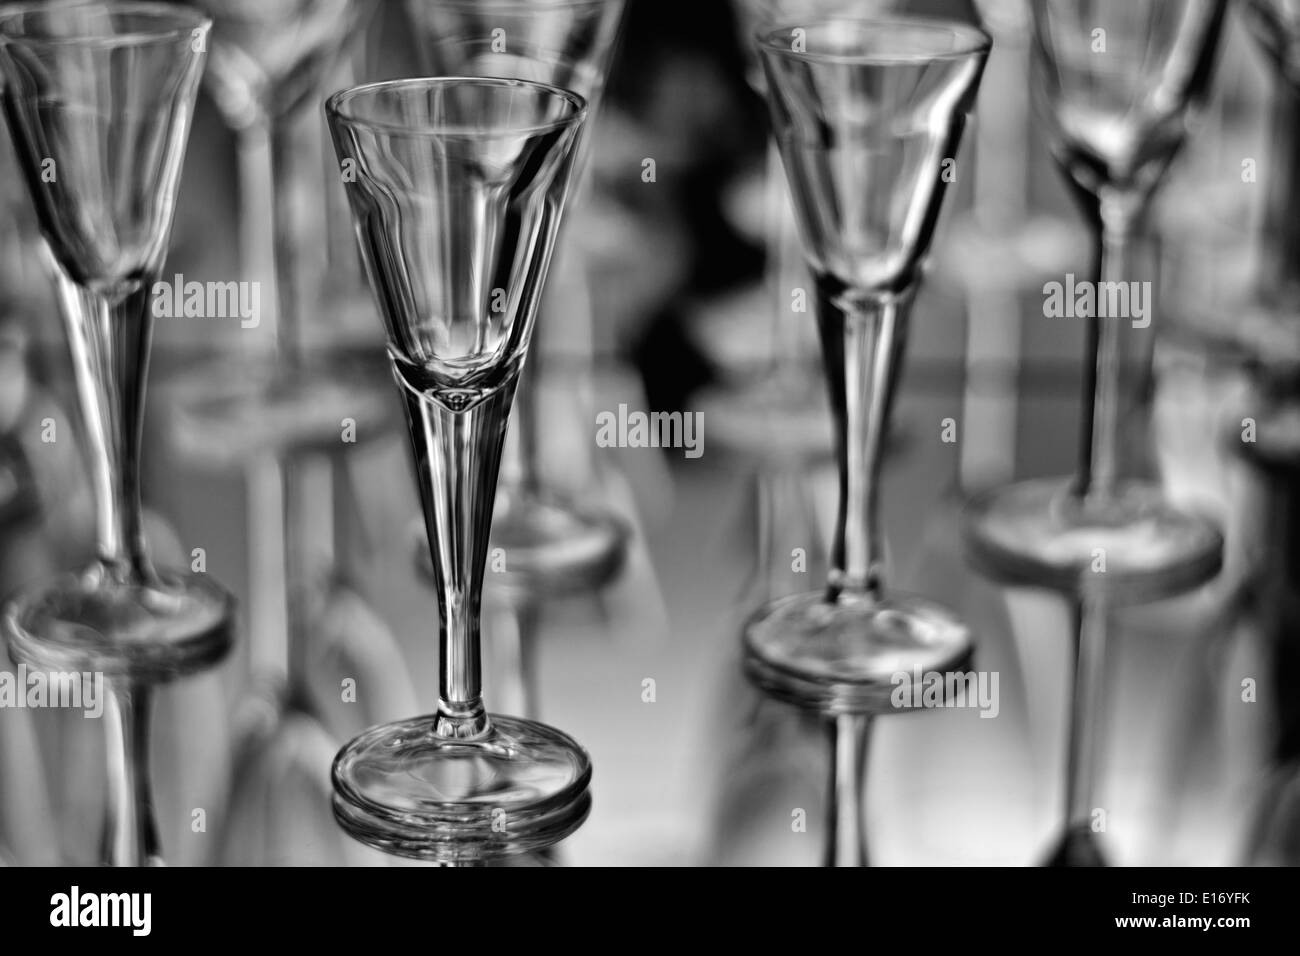 Spirit glass on blurry mirrored background with other glasses Stock Photo